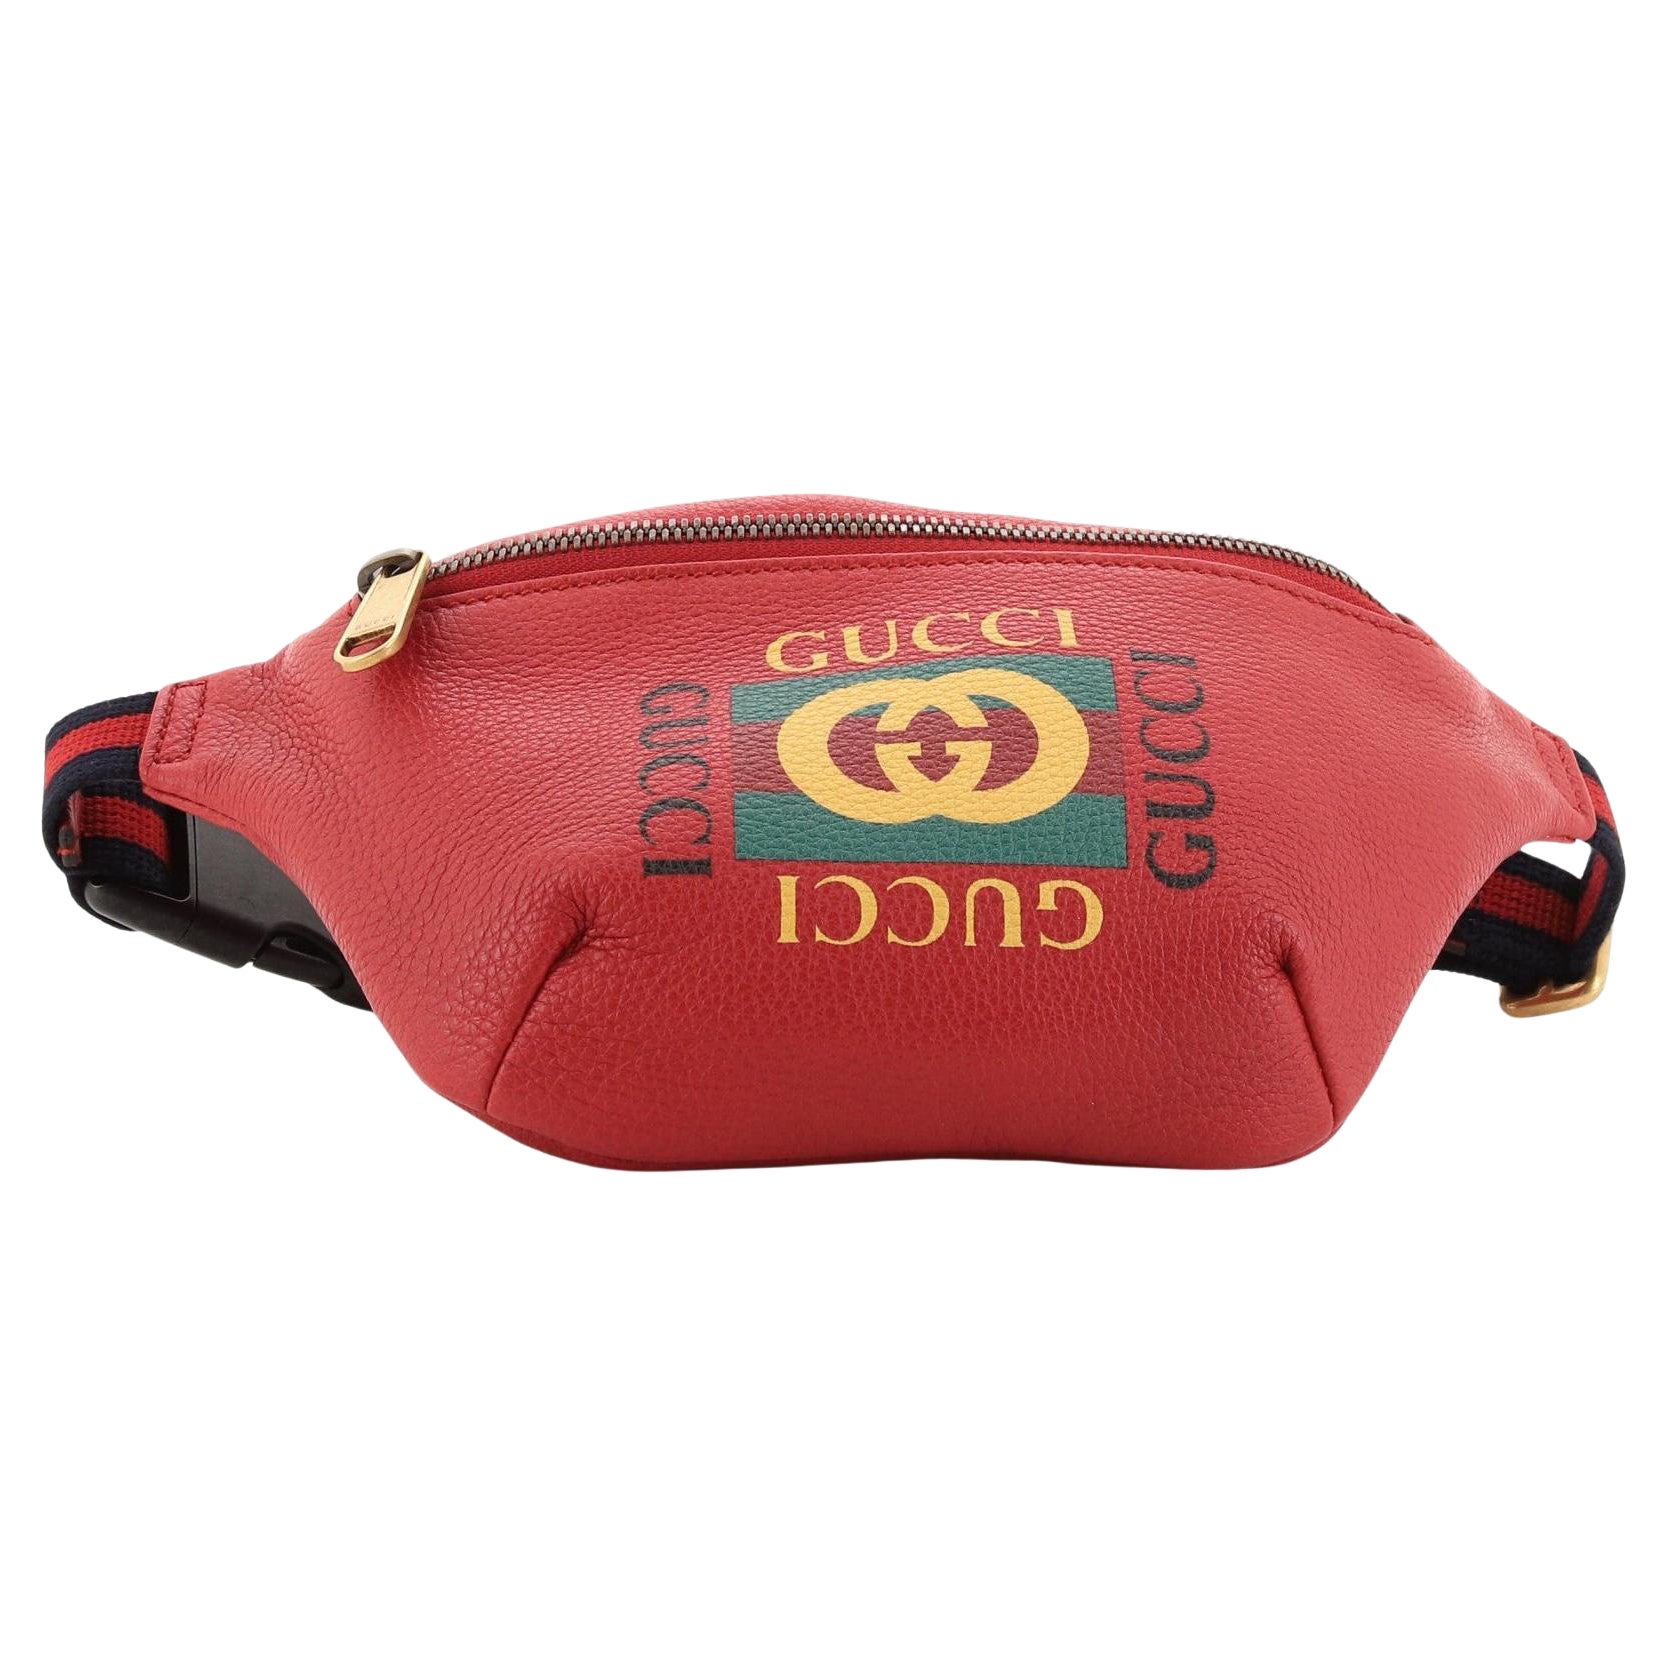  Gucci Logo Belt Bag Printed Leather Small